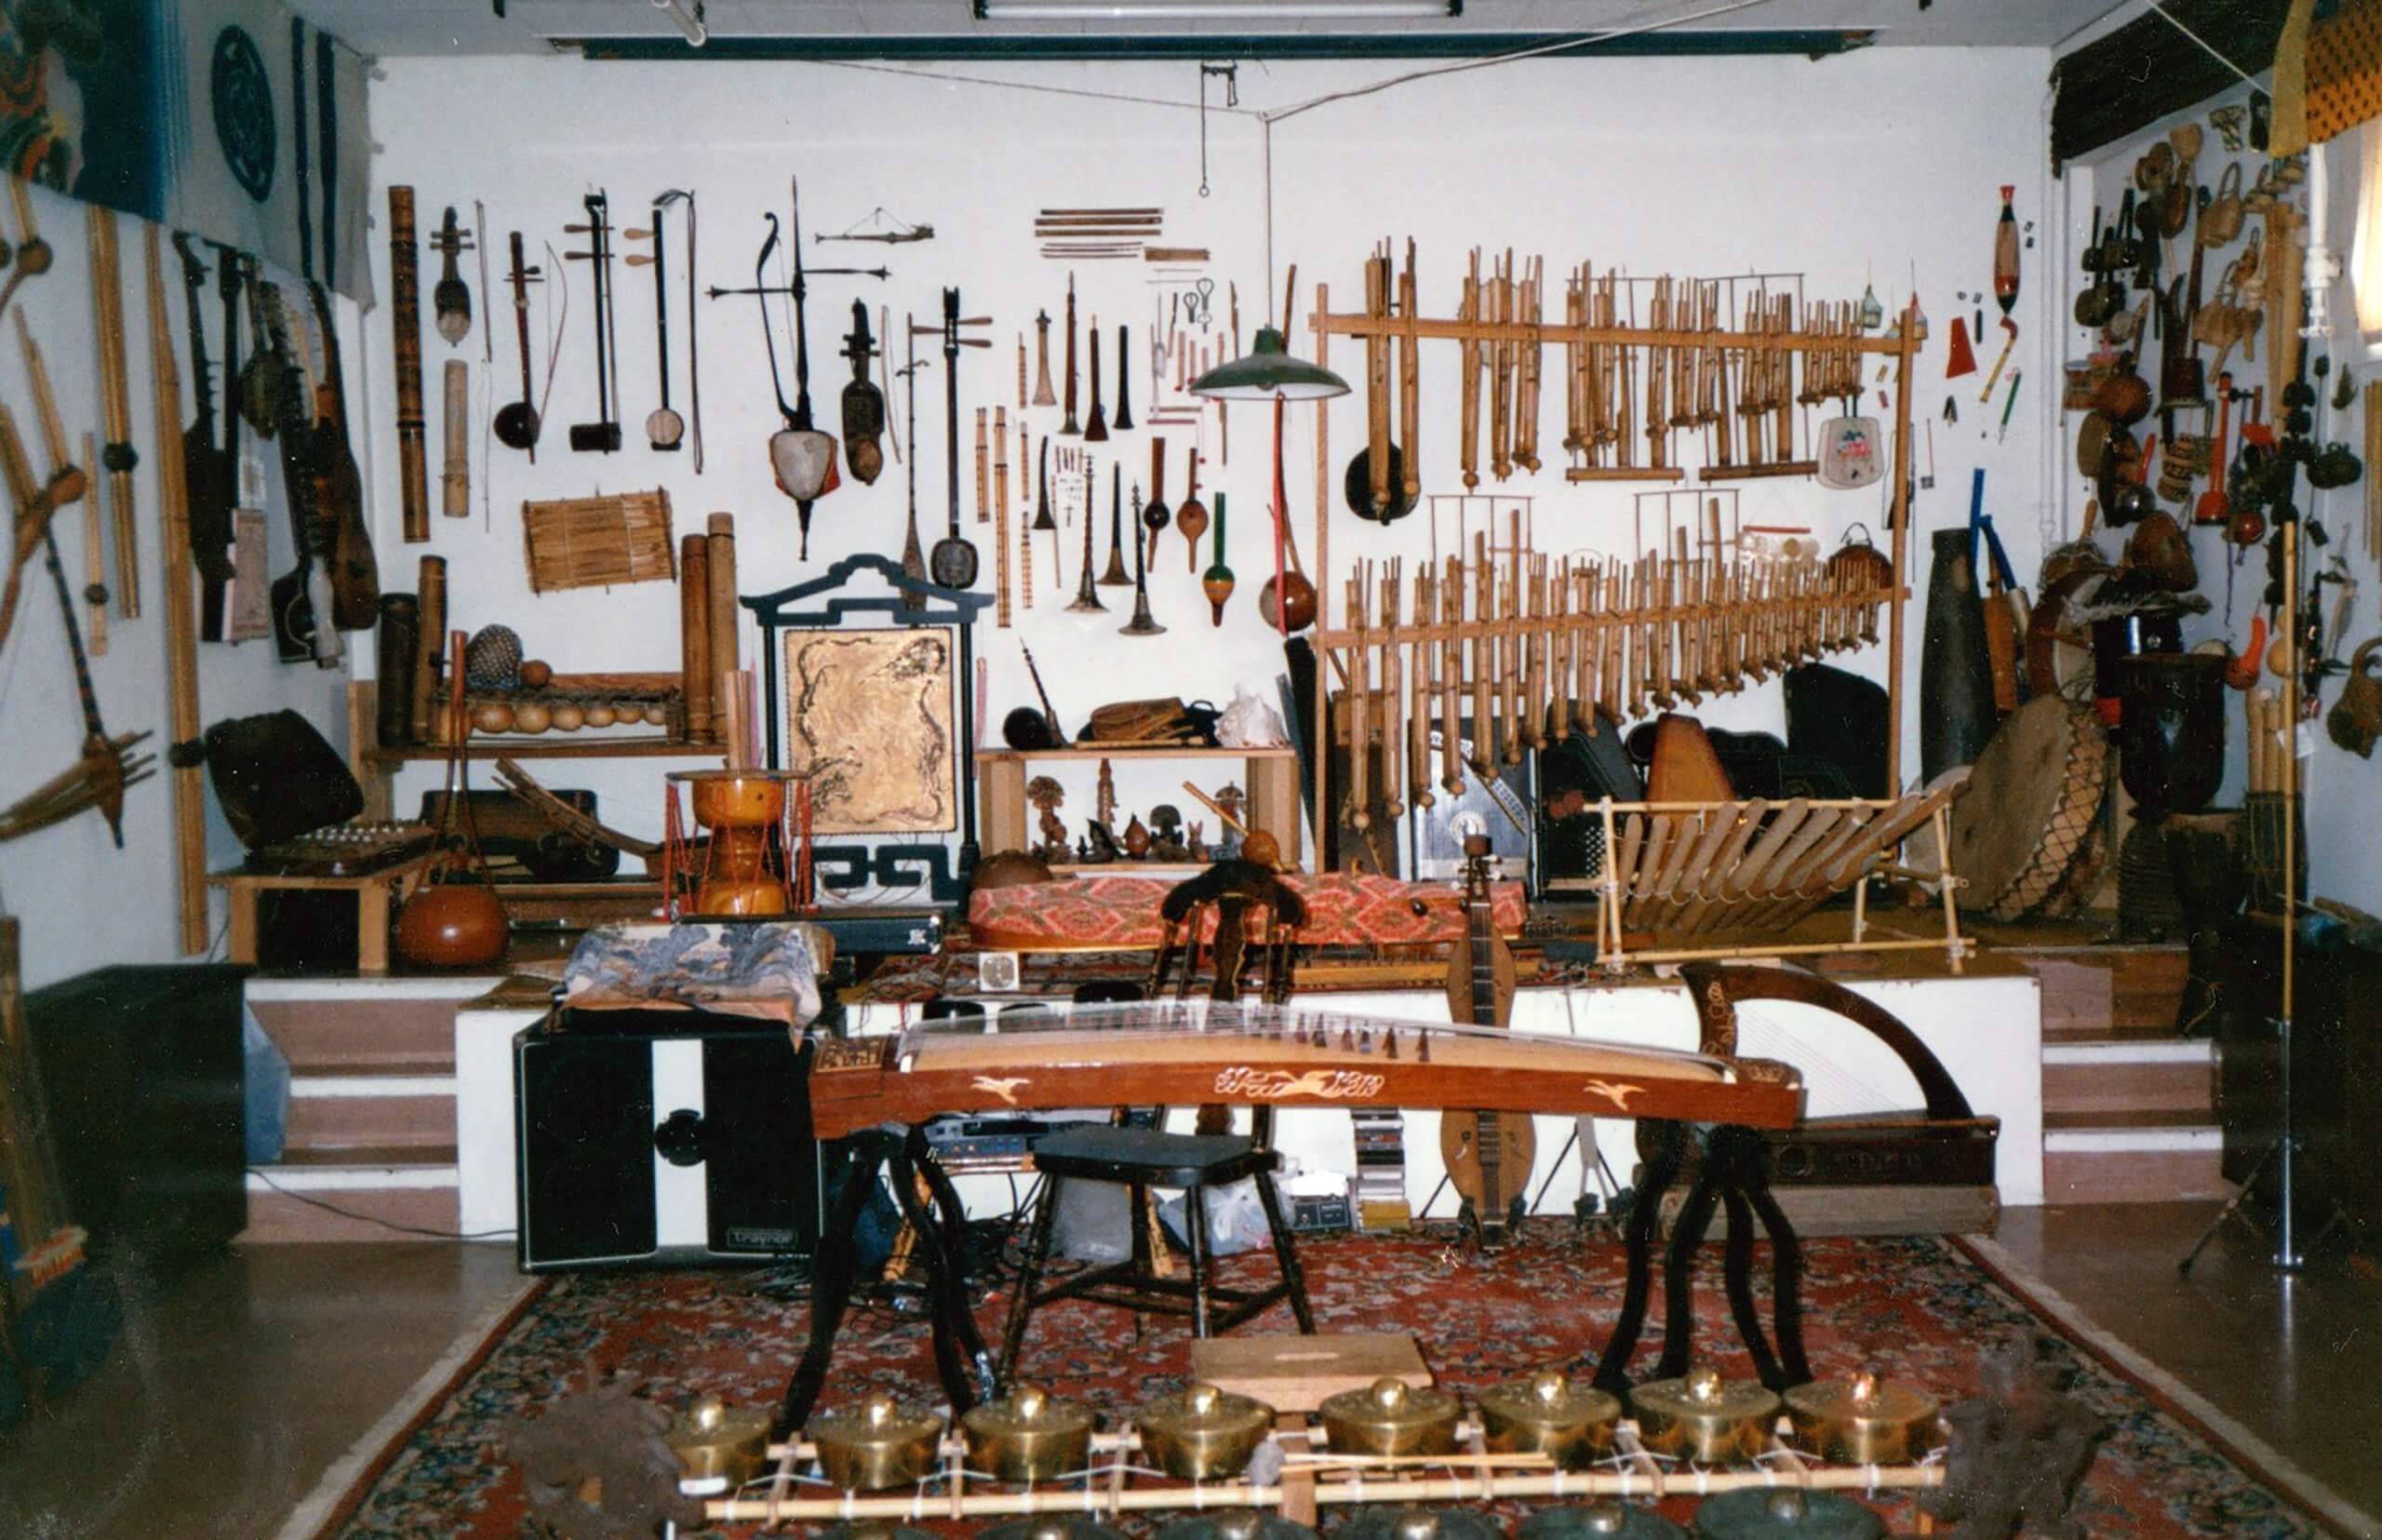 Walking The Walls: The Transformation of a Working Instrument Collection